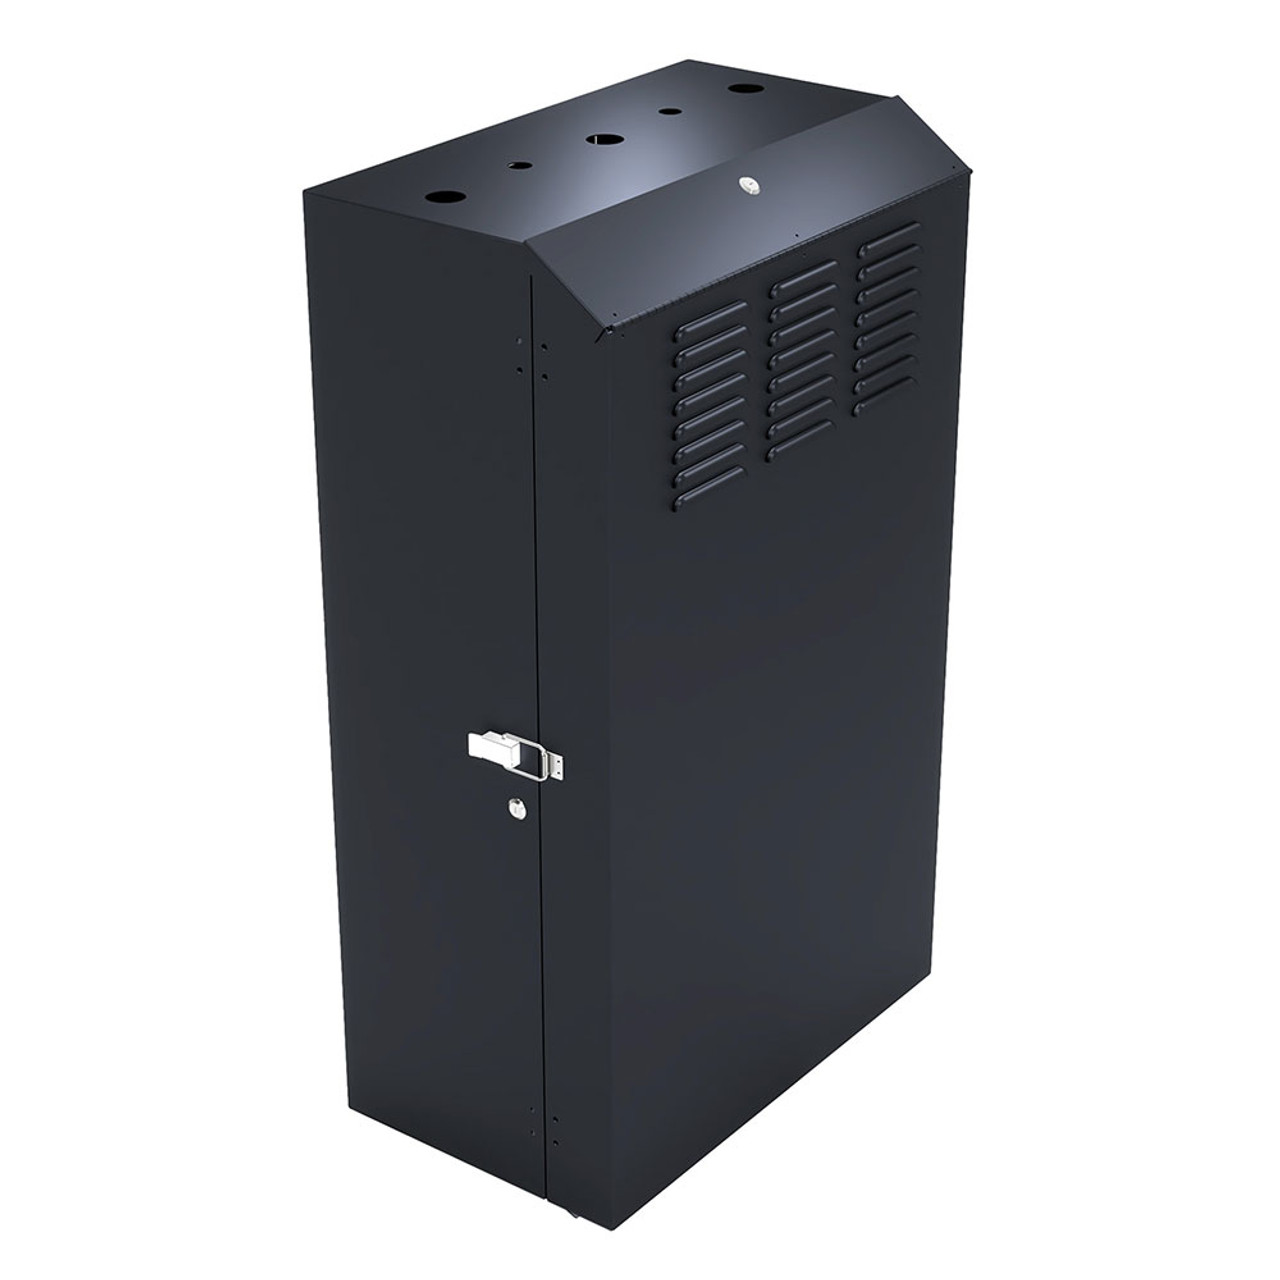 8U Vertical Wall Mount Enclosure, Cold-Rolled Steel, Black (RAL9005) 32.4 inches (825mm) to 35.4 inches (900mm) Switch Depth, CE Compliant